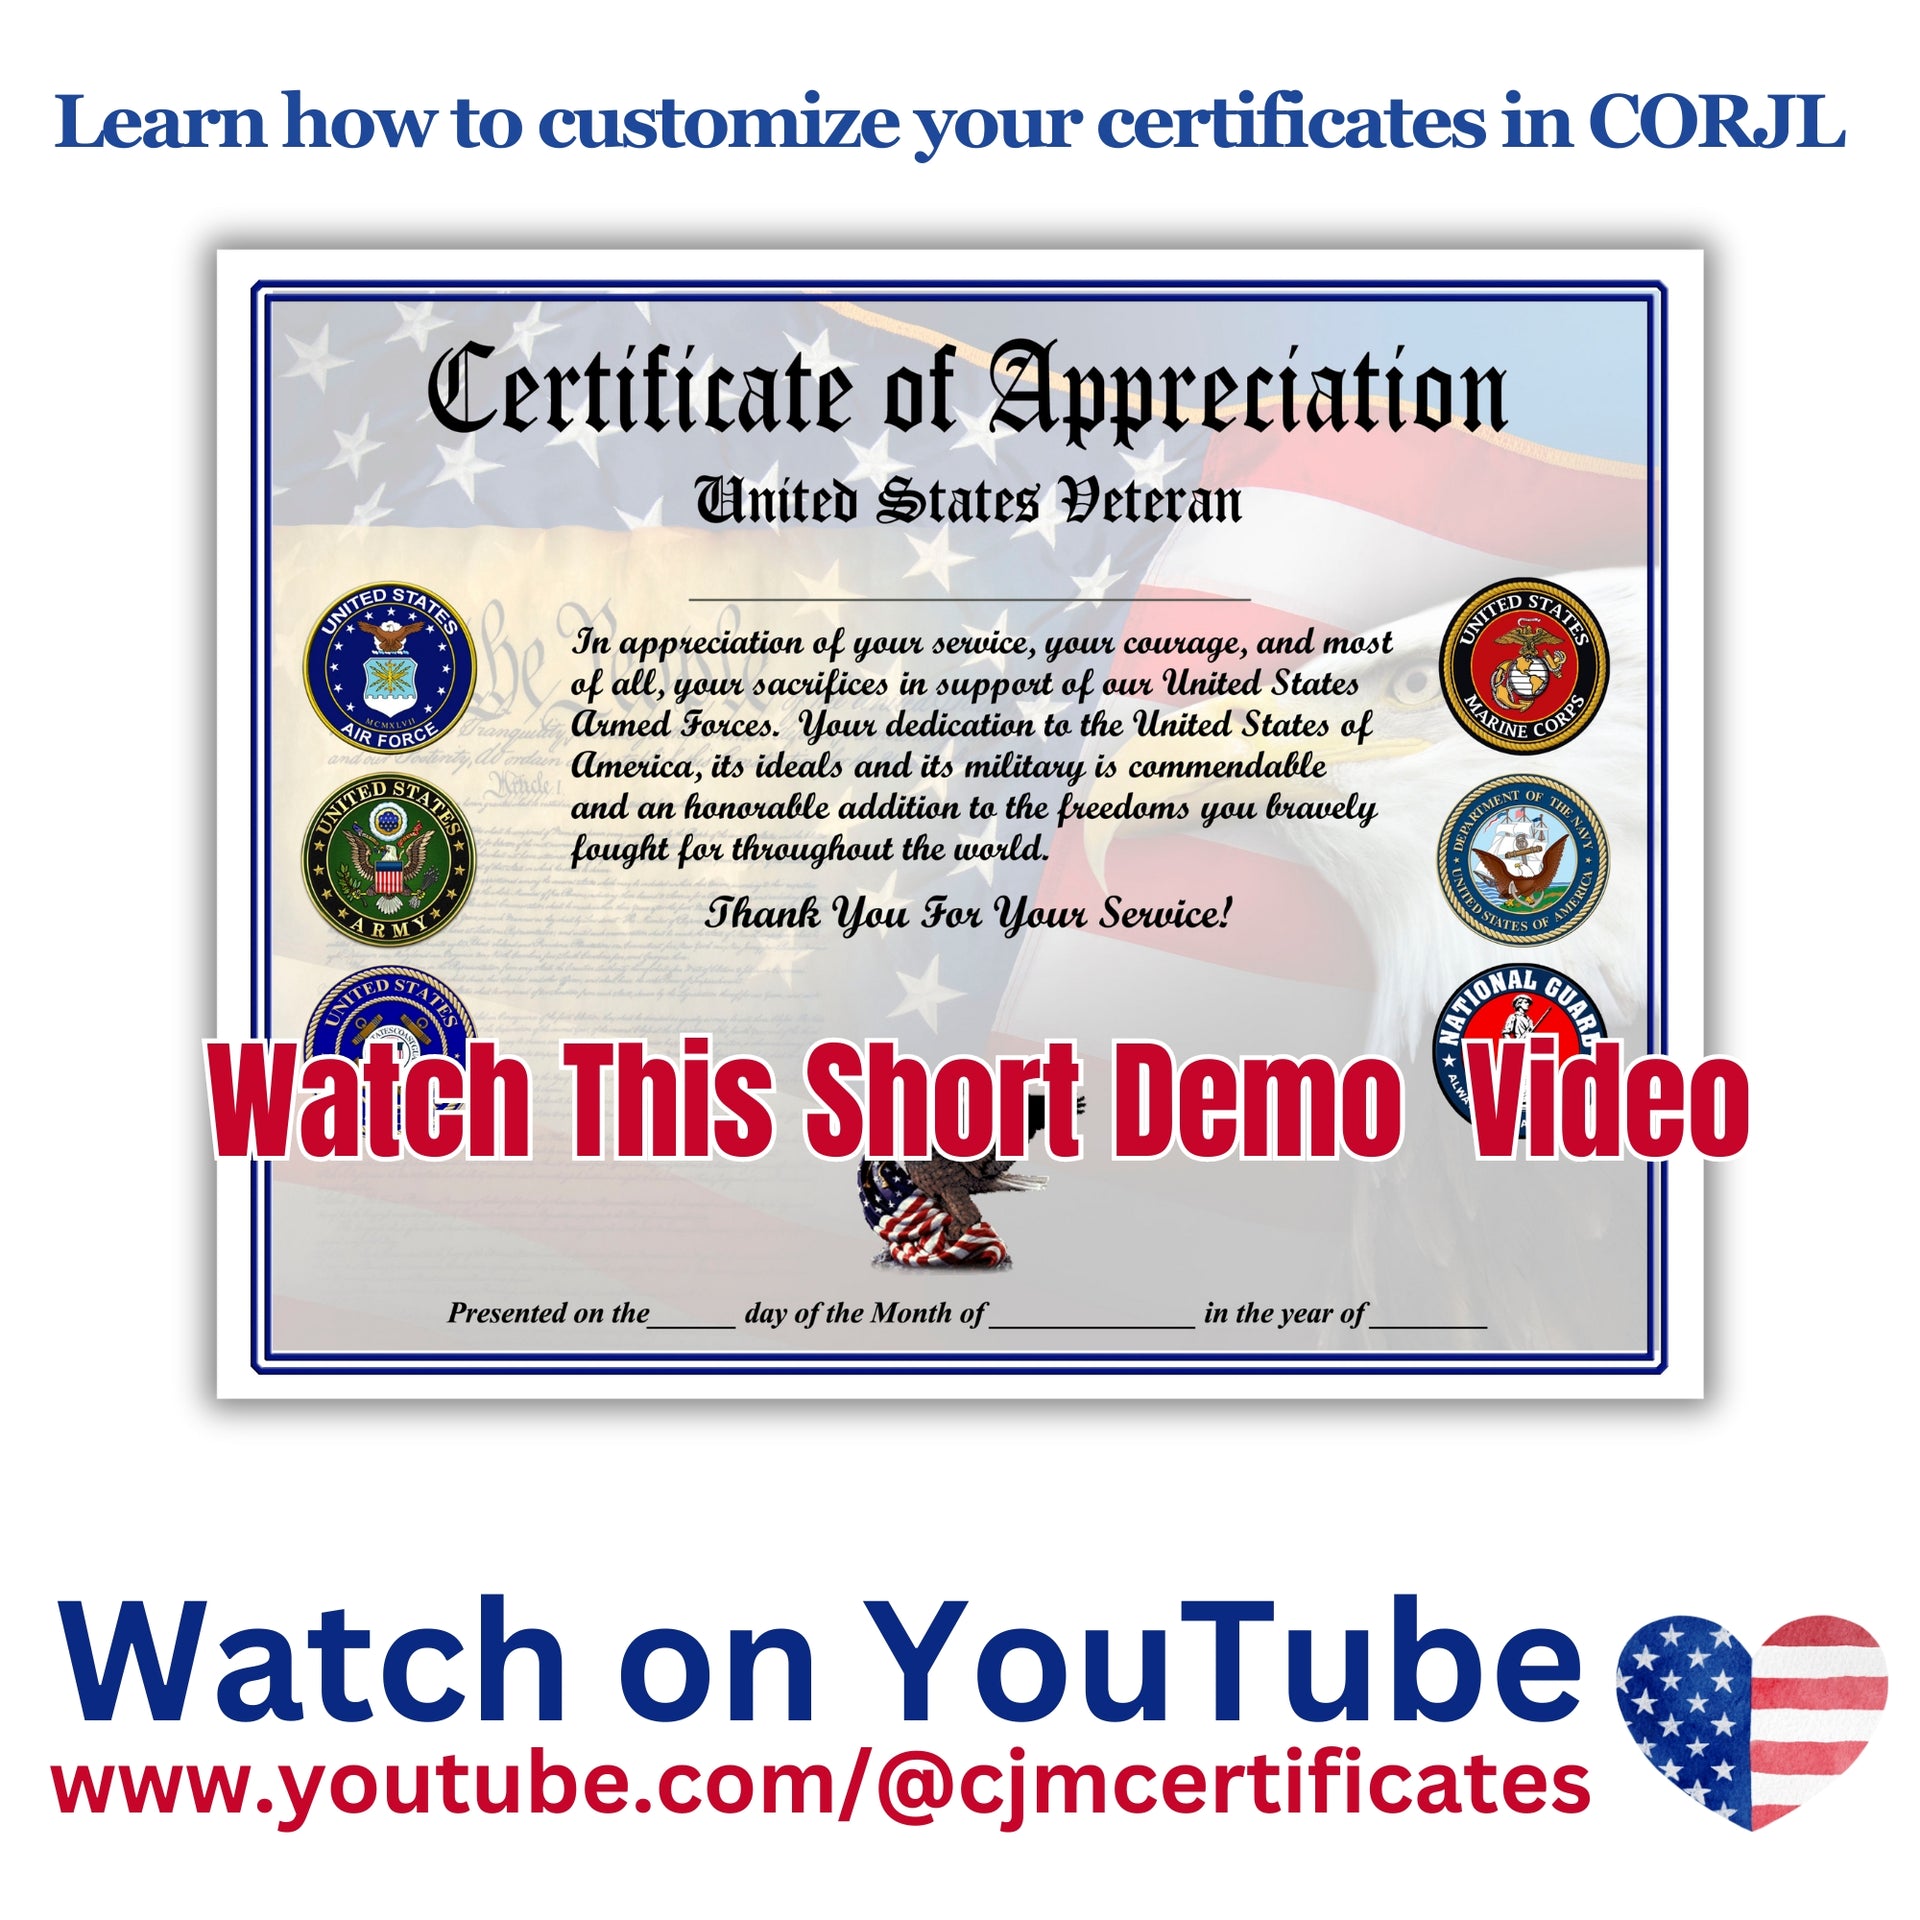 Load video: CJM Certificates YouTube Channel Video To Learn How To Edit &amp; Download Your Military Certificate.